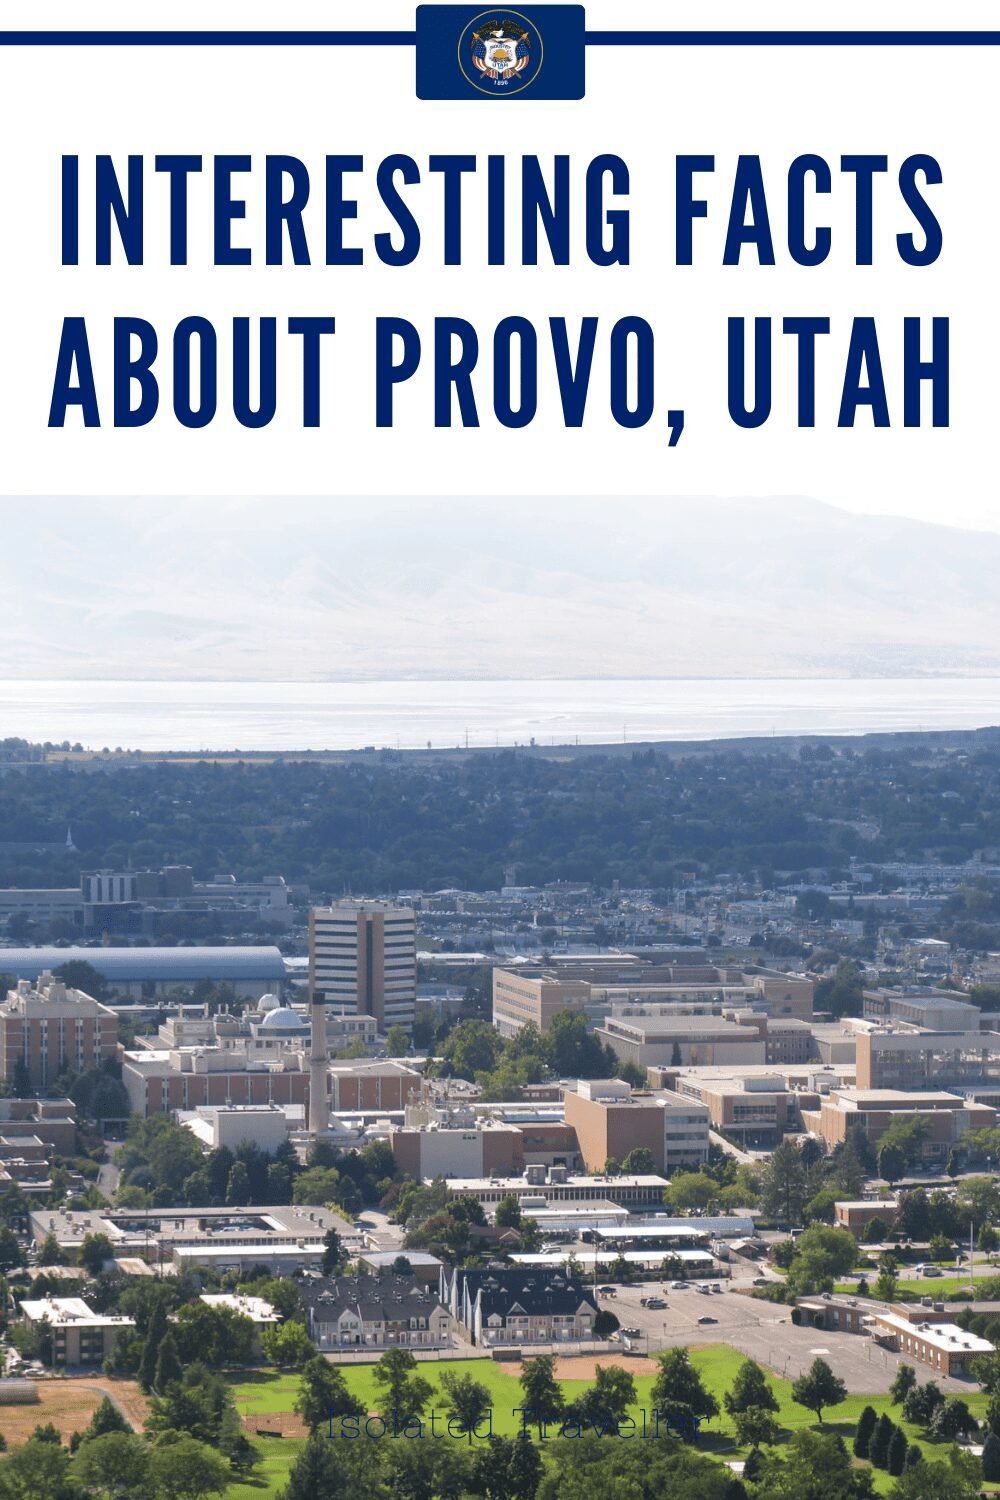 Facts About Provo, Utah